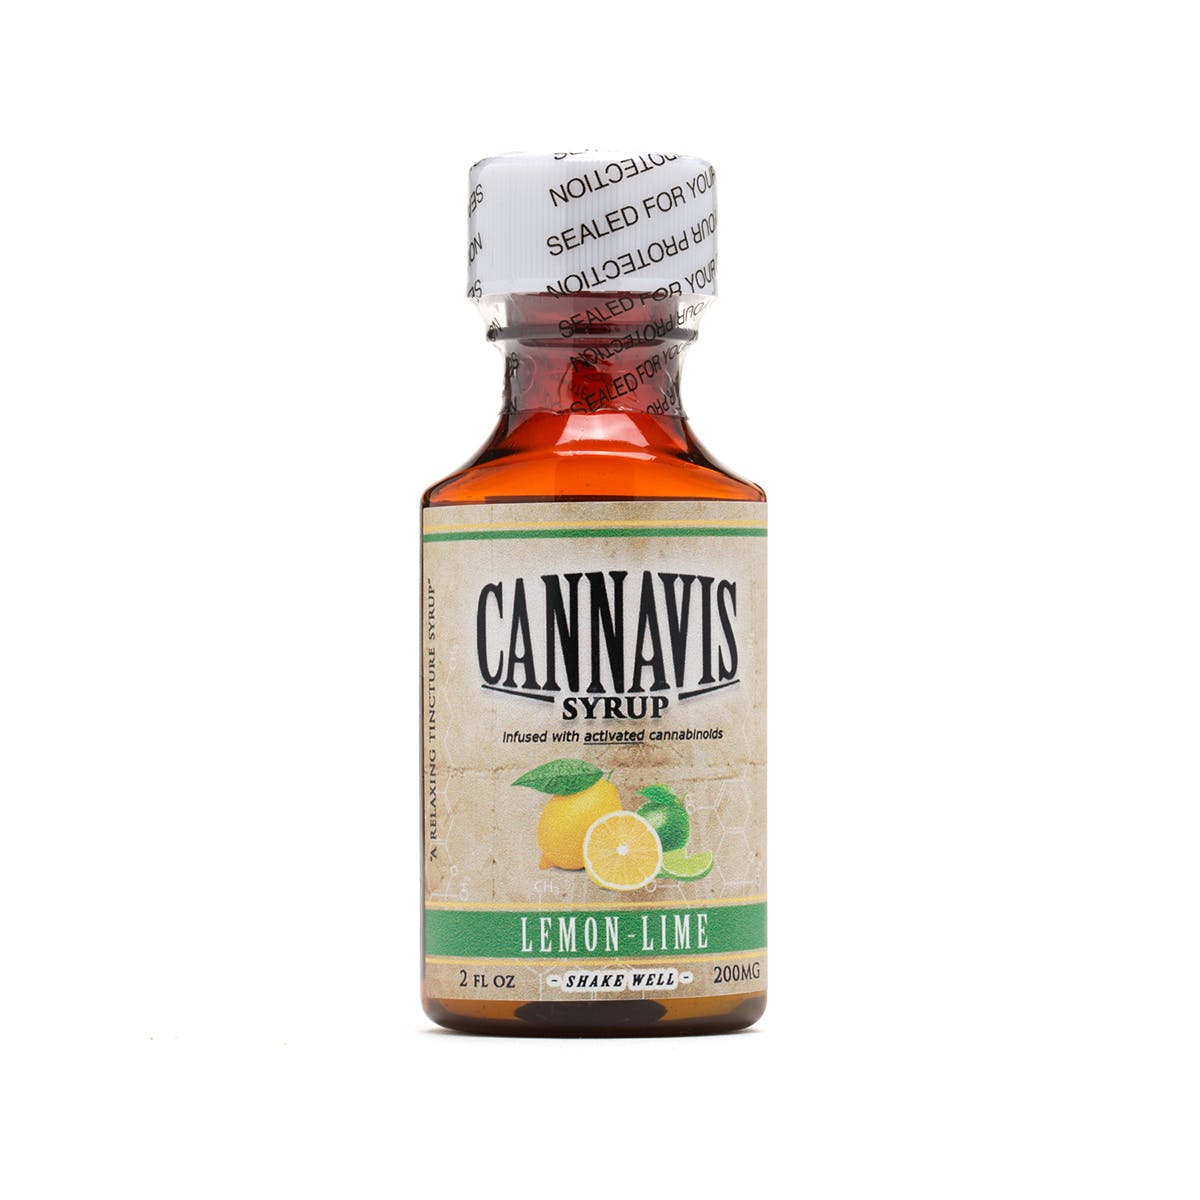 marijuana-dispensaries-church-of-holy-fire-in-city-of-industry-cannavis-syrup-2c-lemon-lime-200mg